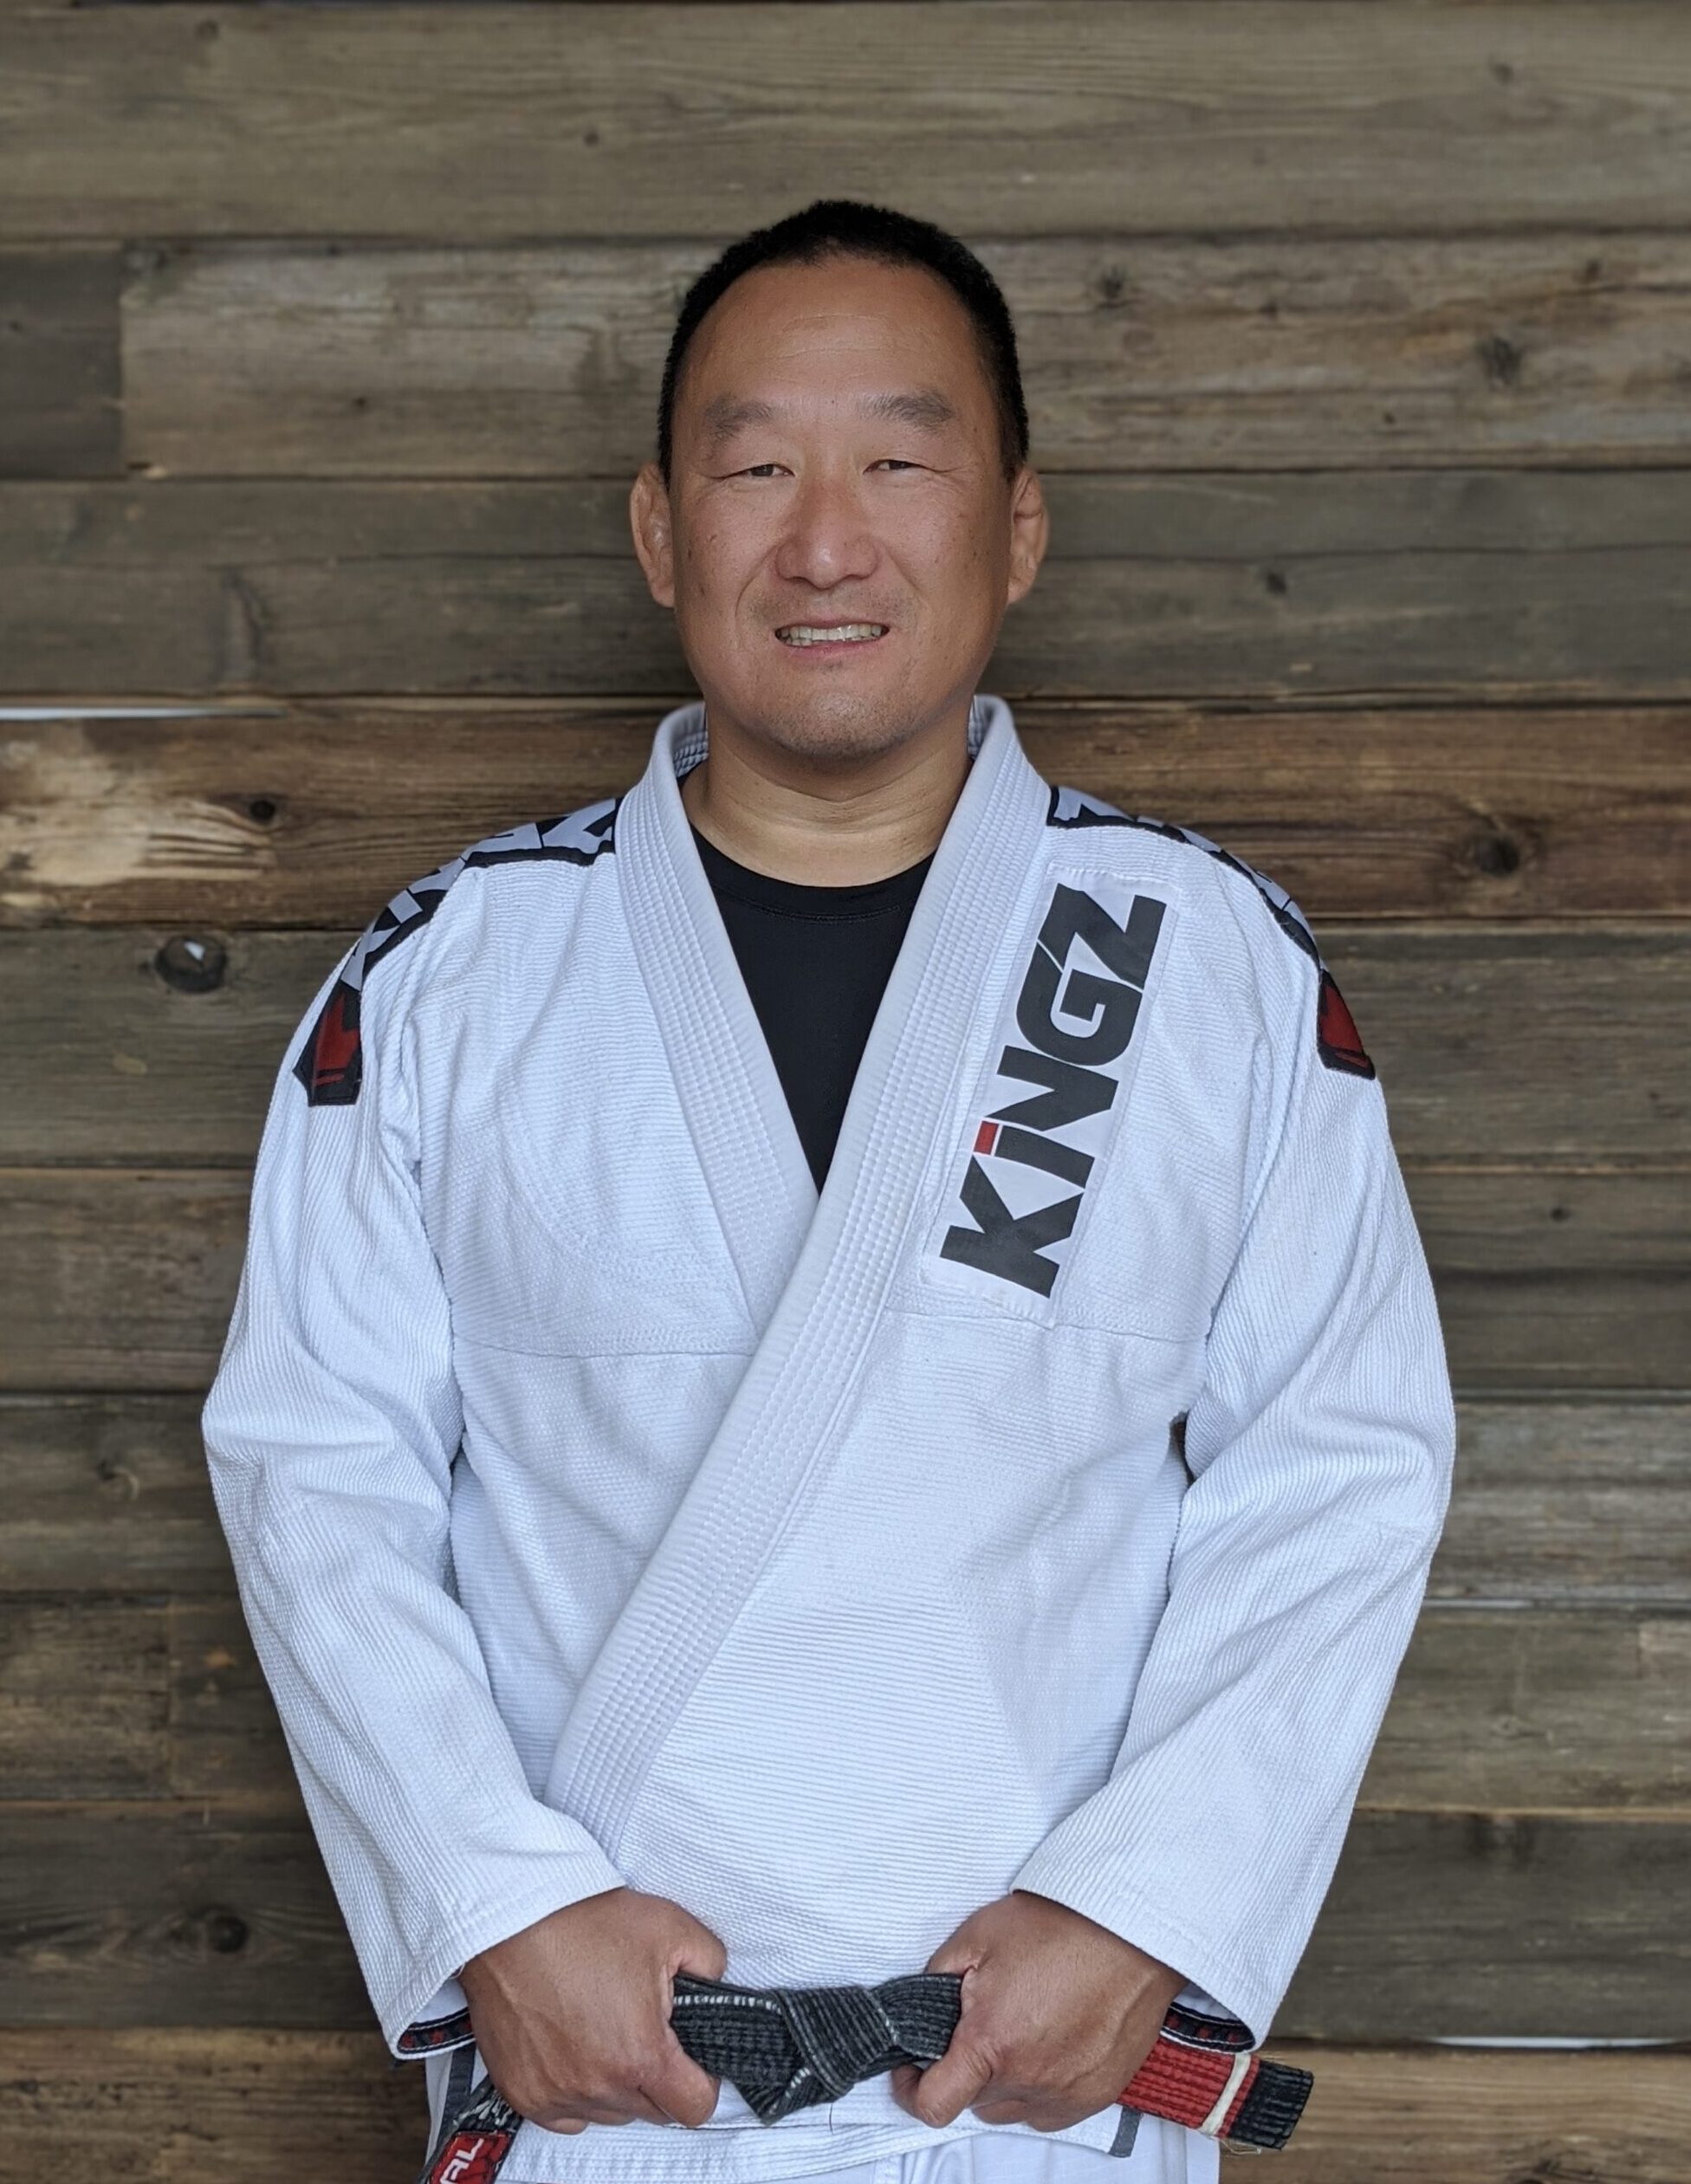 Professor Mike posing for a picture in a white Jiu-Jitsu gi with his black belt on in Blaine MN